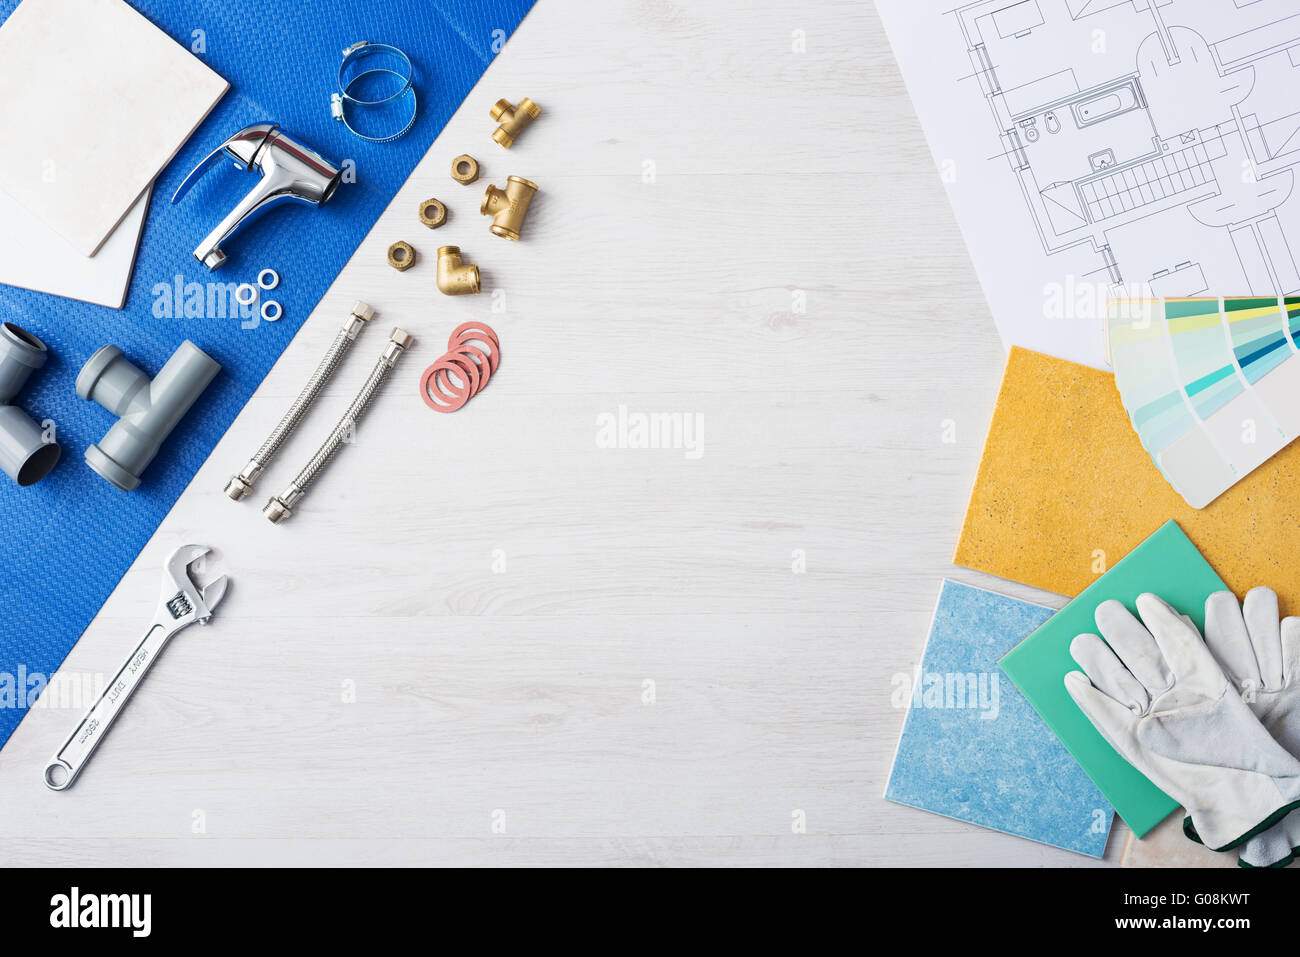 Plumber's work table banner with work tools, faucet, tiles and color swatches, top view, copy space at center Stock Photo